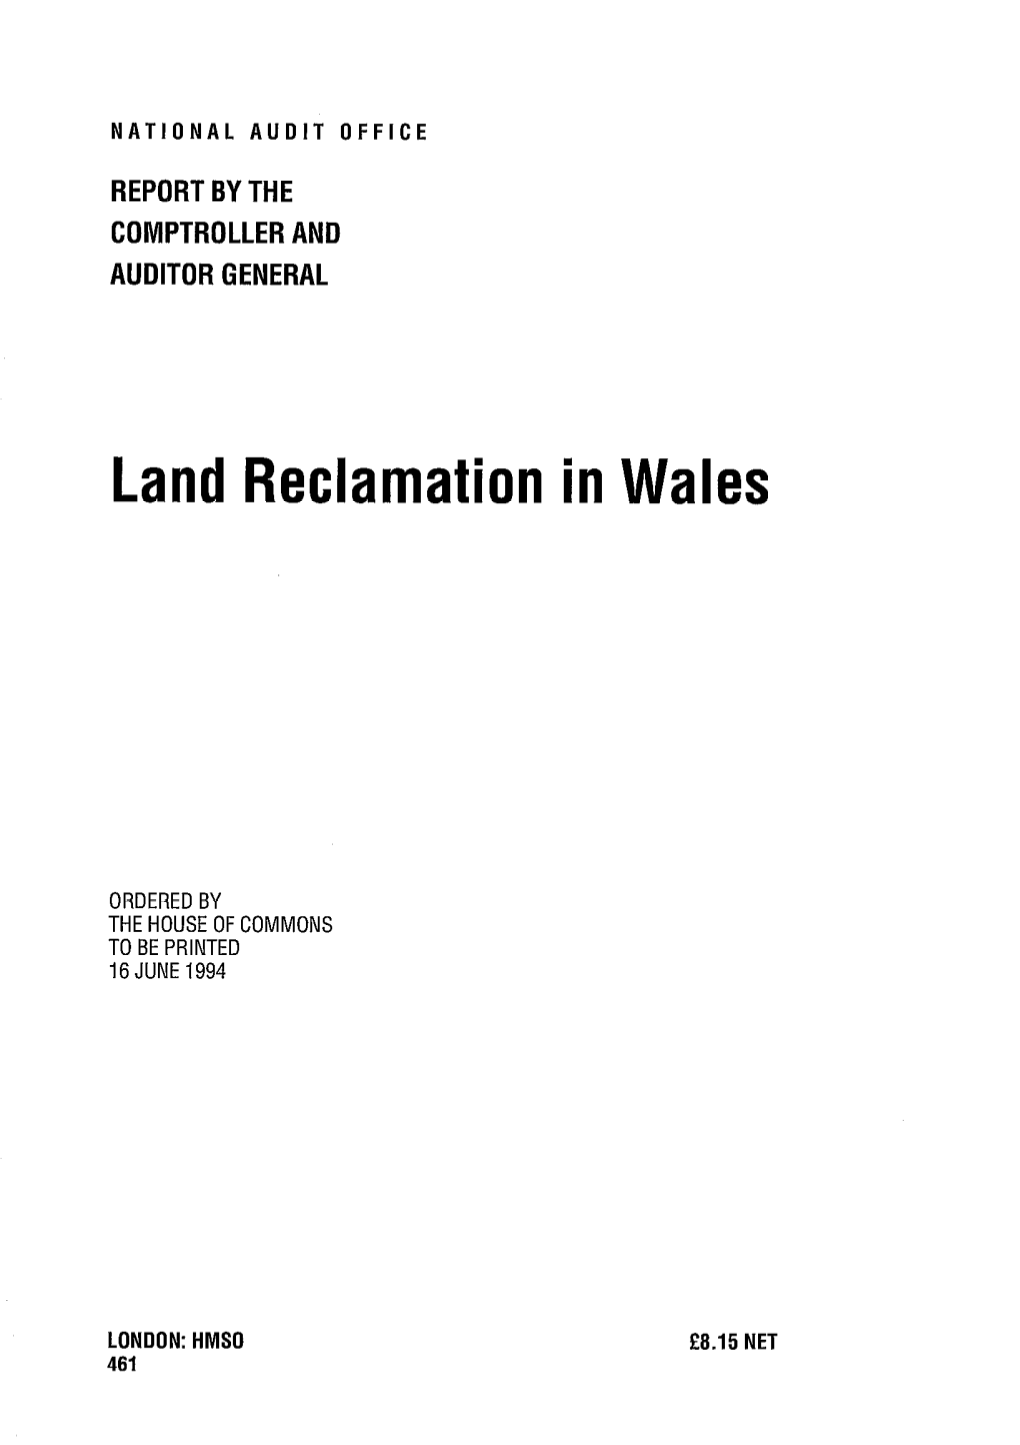 Land Reclamation in Wales